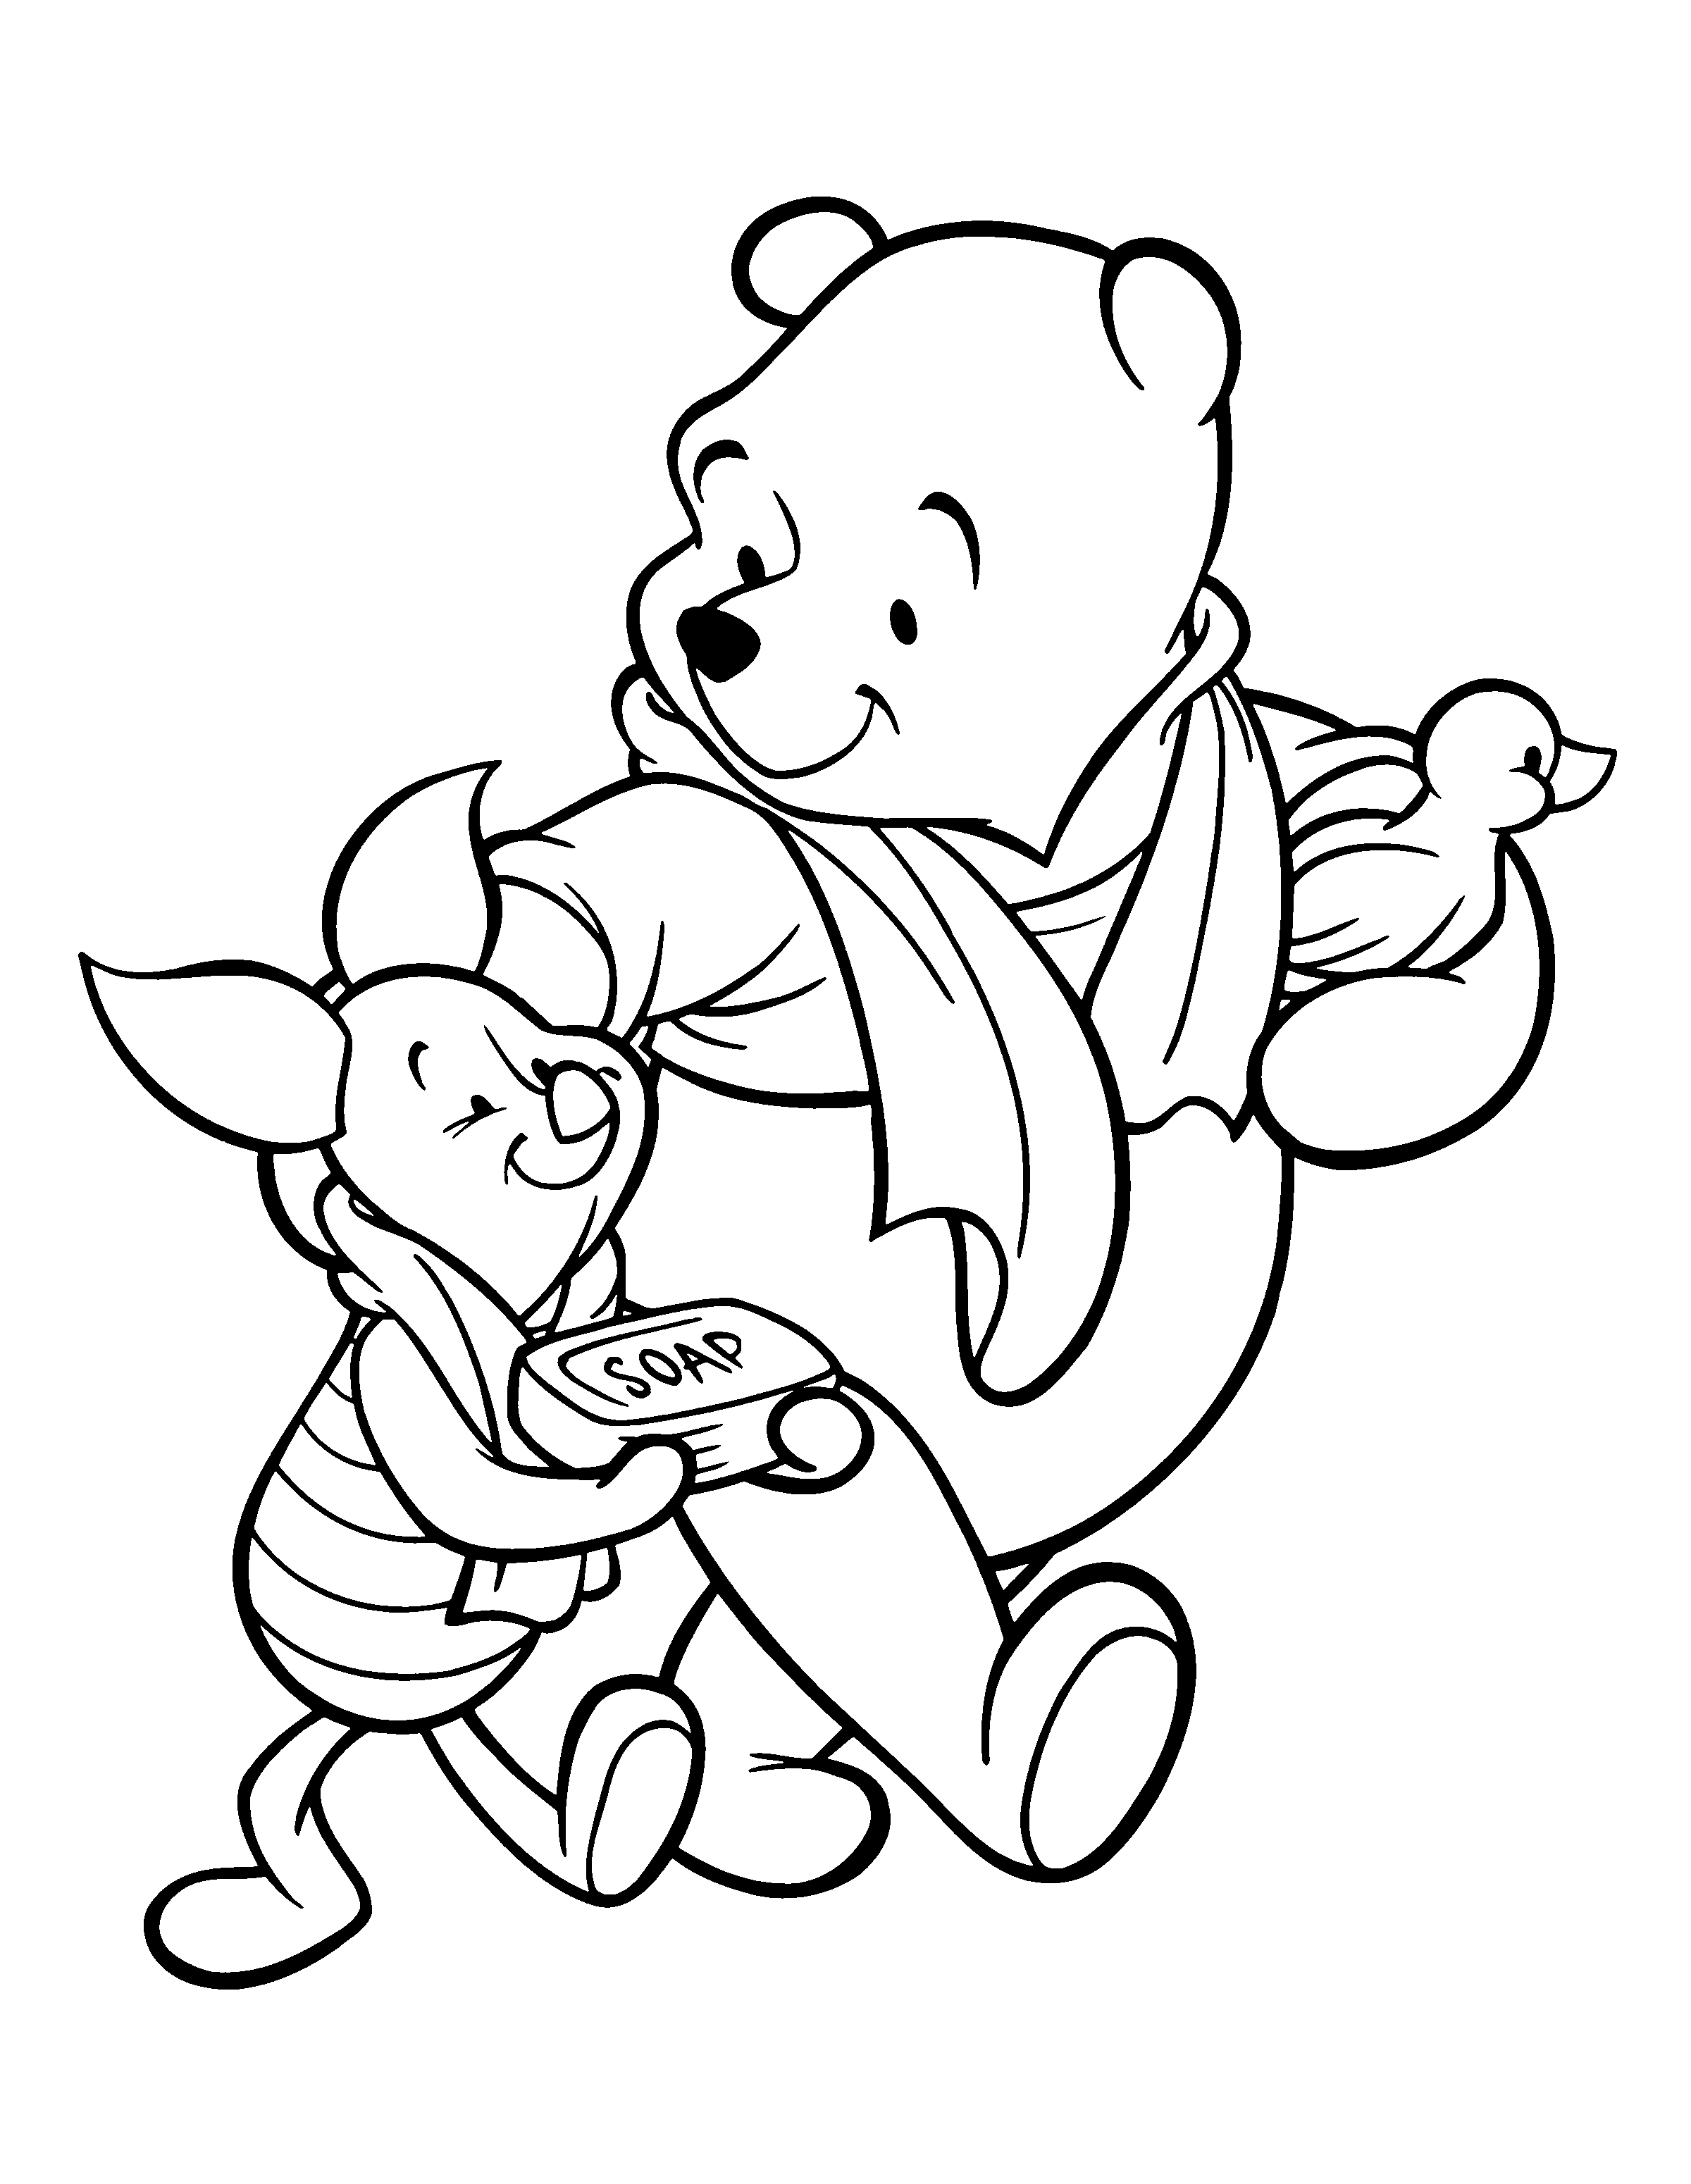 Bathtime Winnie the Pooh and Piglet Coloring Pages